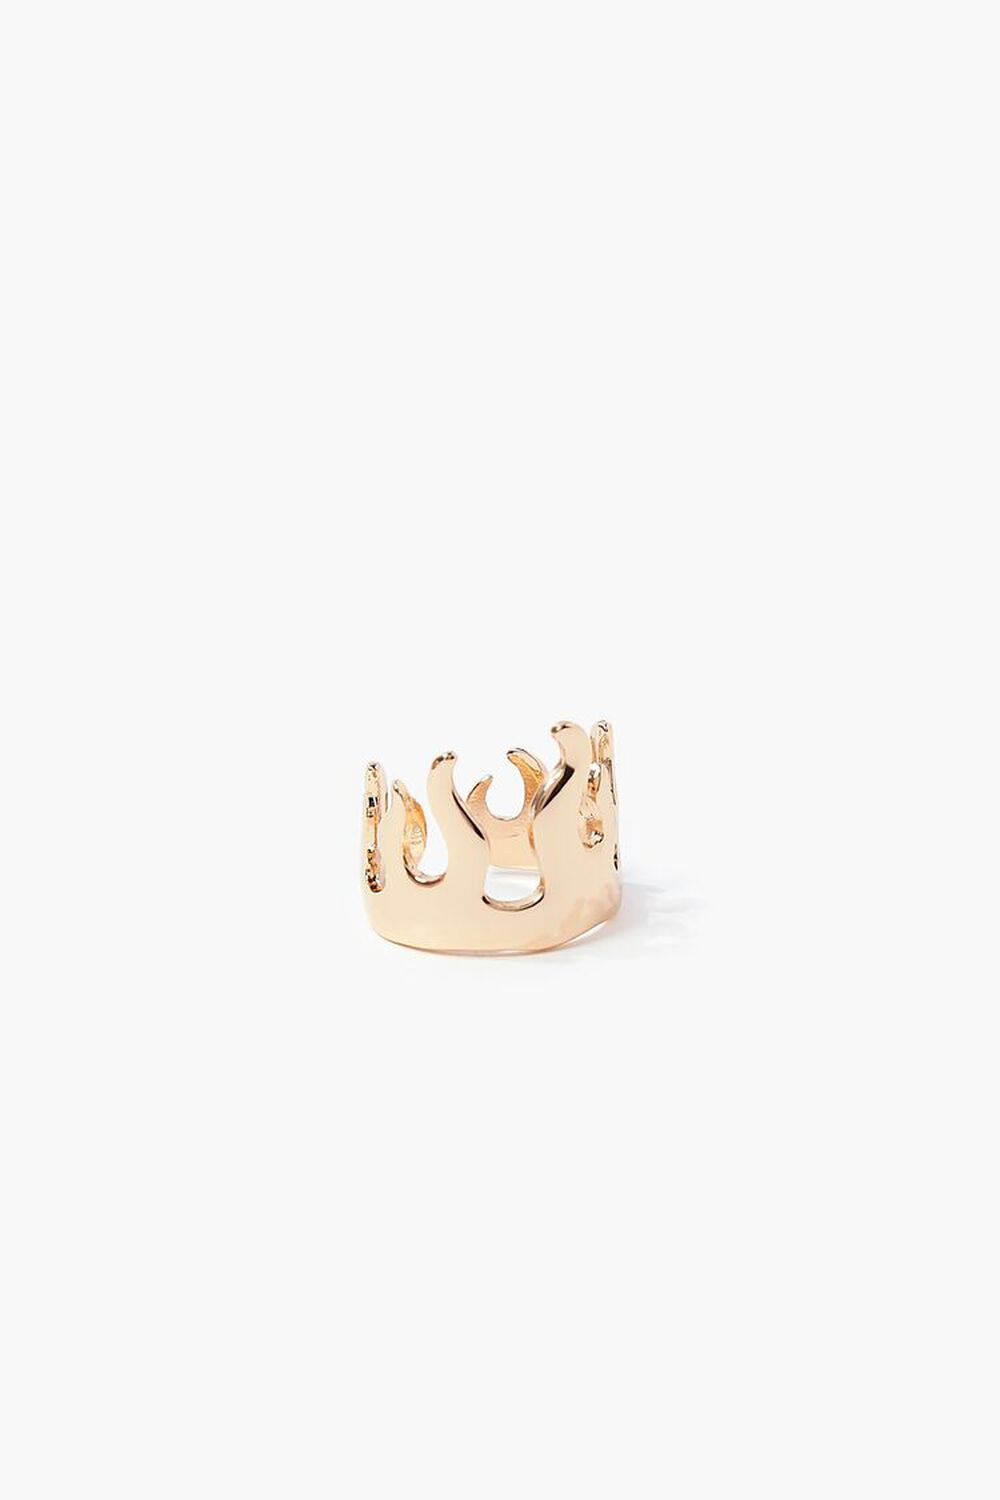 GOLD Flame Cocktail Ring, image 1